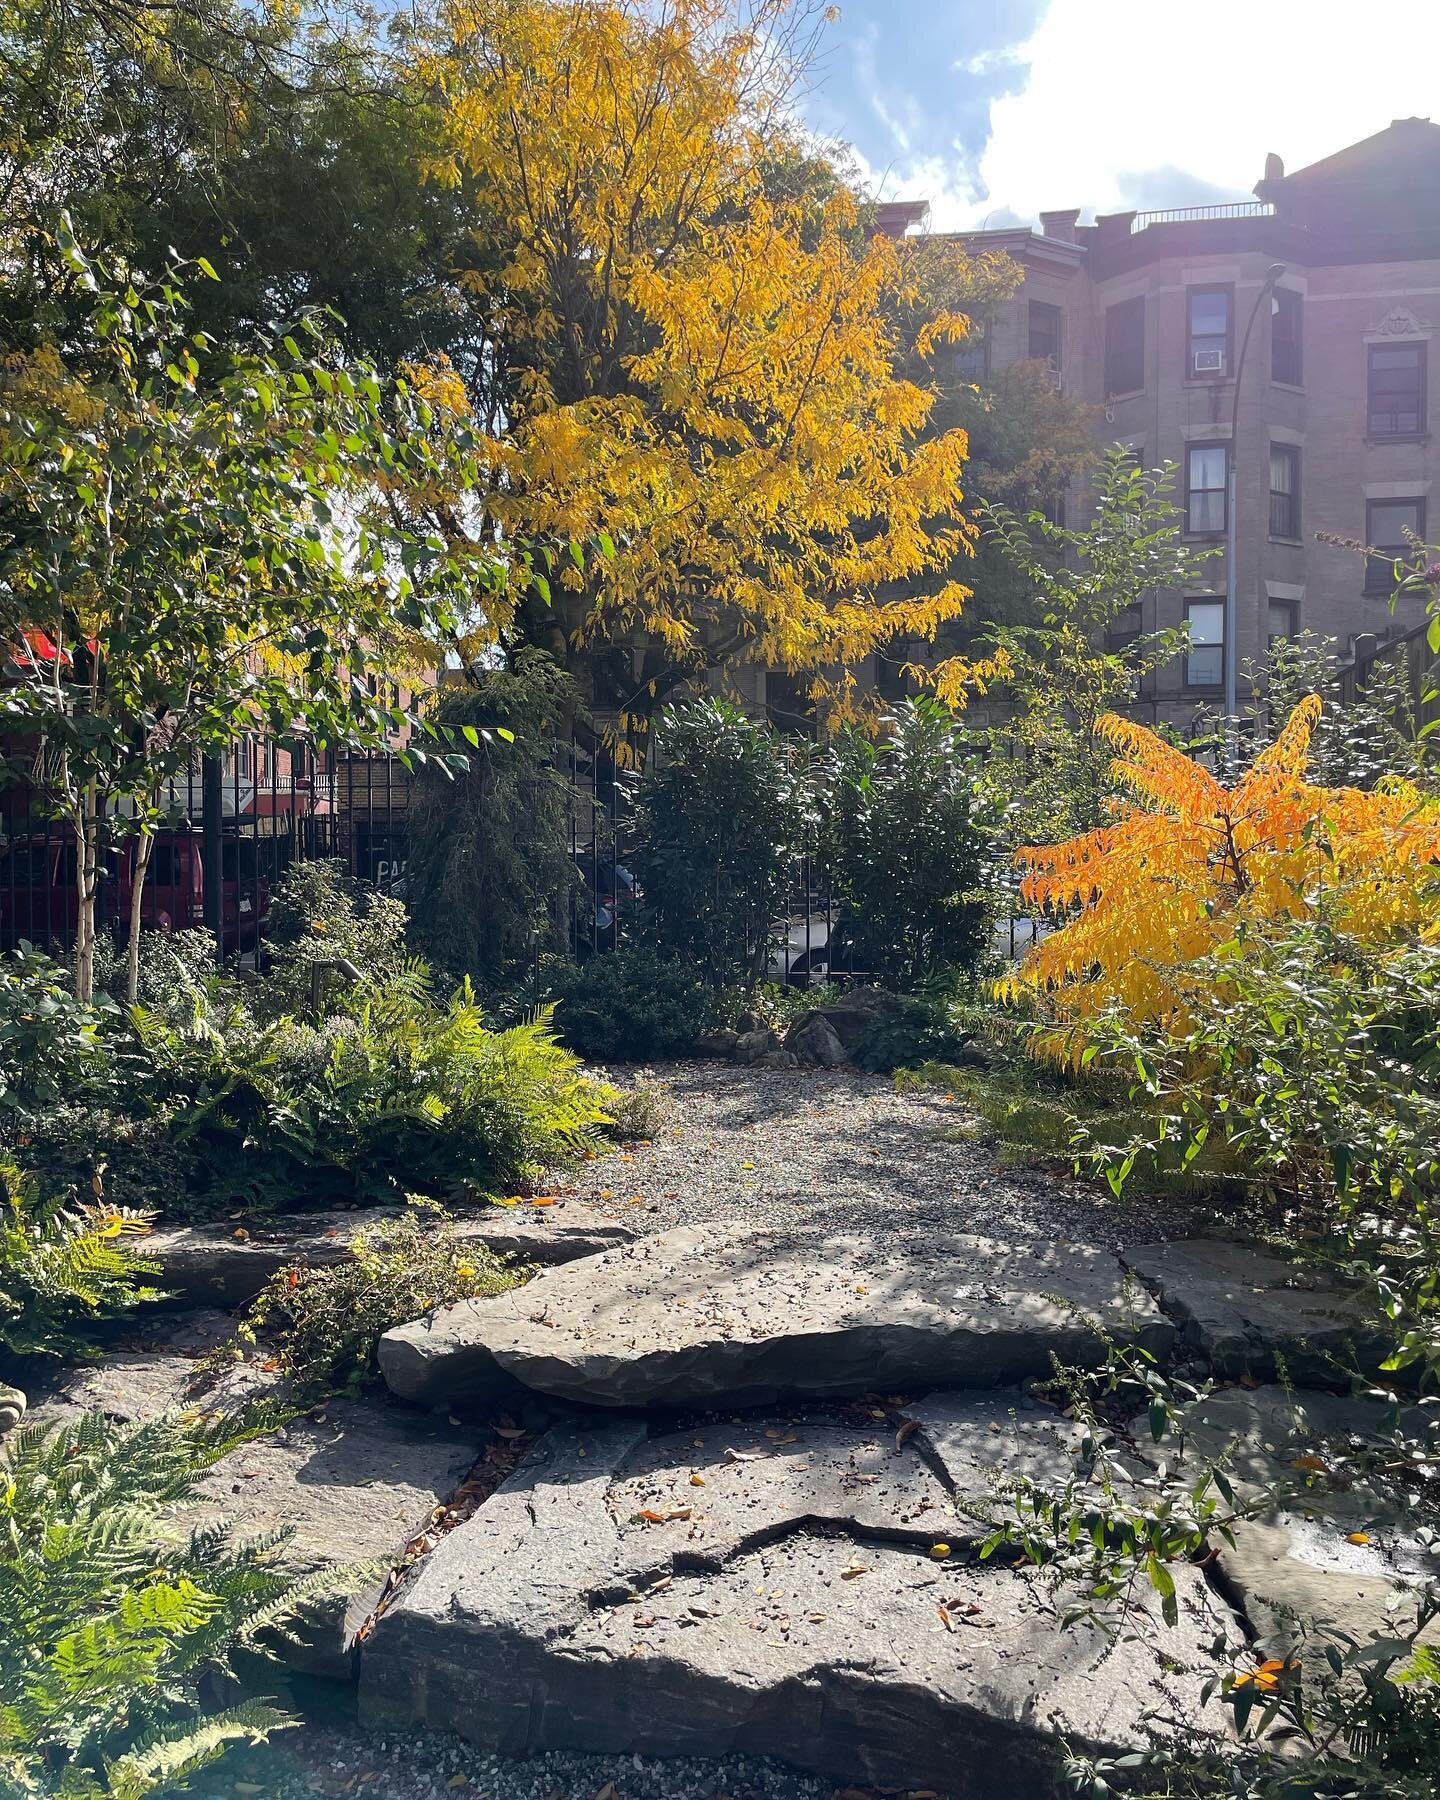 Fall color is finally hitting Dean Street. The Tiger Eye Sumac is brilliant!
.
.
.
.
.

#landscapedesign #brooklynmade #gardendesign #urbangardens #brooklyn #brooklynbackyard #gardendesign #landscaping #landscapedesigners #outdoorconstruction #urbang